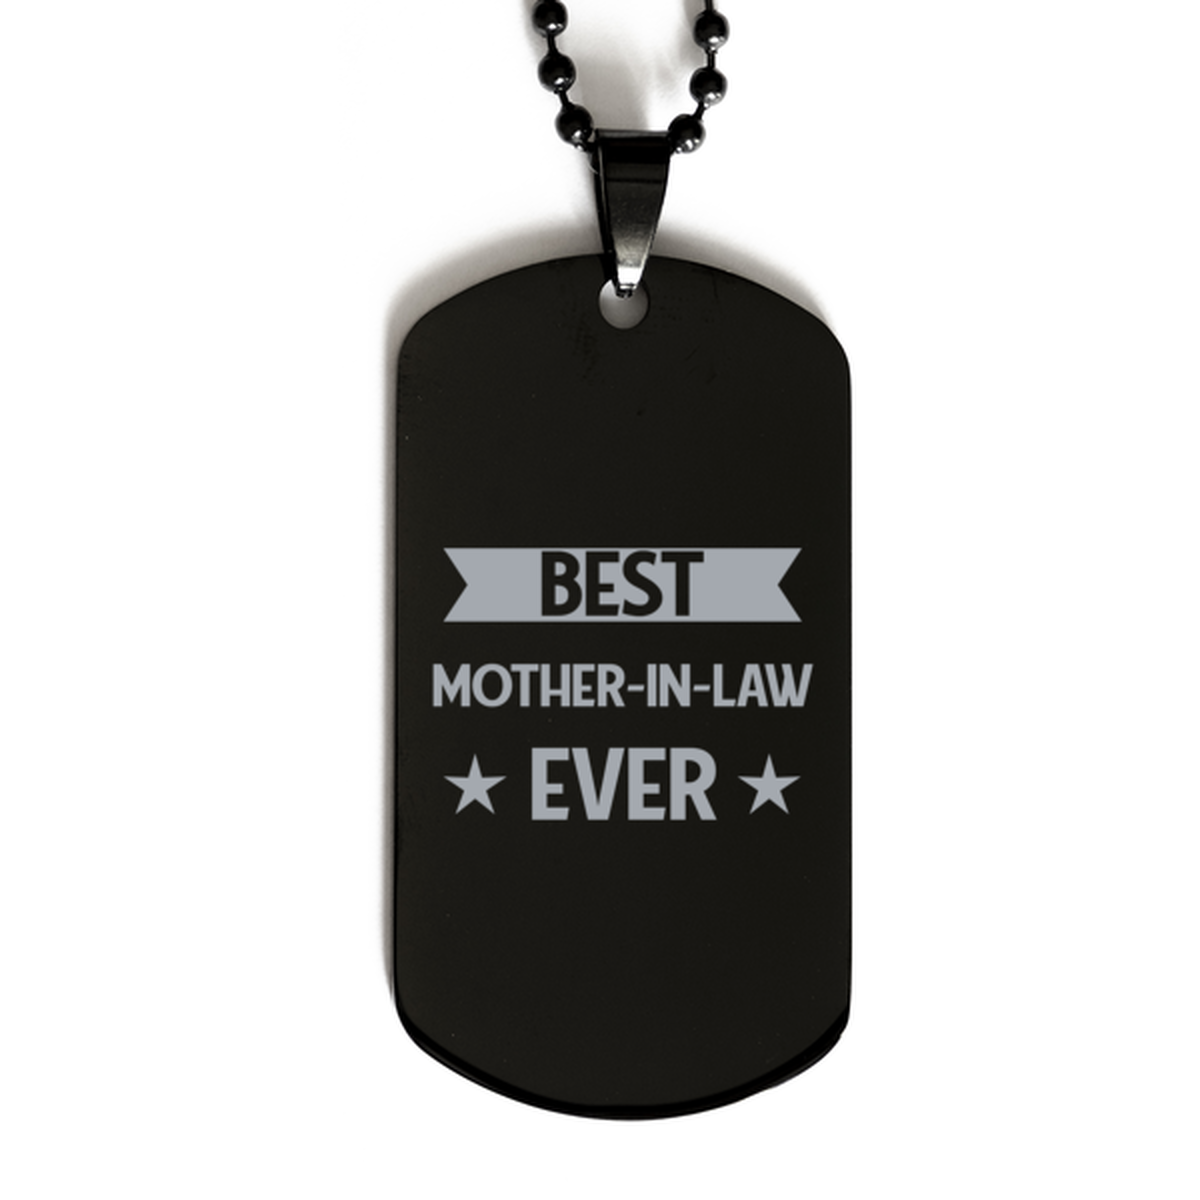 Best Mother-in-law Ever Mother-in-law Gifts, Funny Black Dog Tag For Mother-in-law, Birthday Family Presents Engraved Necklace For Women